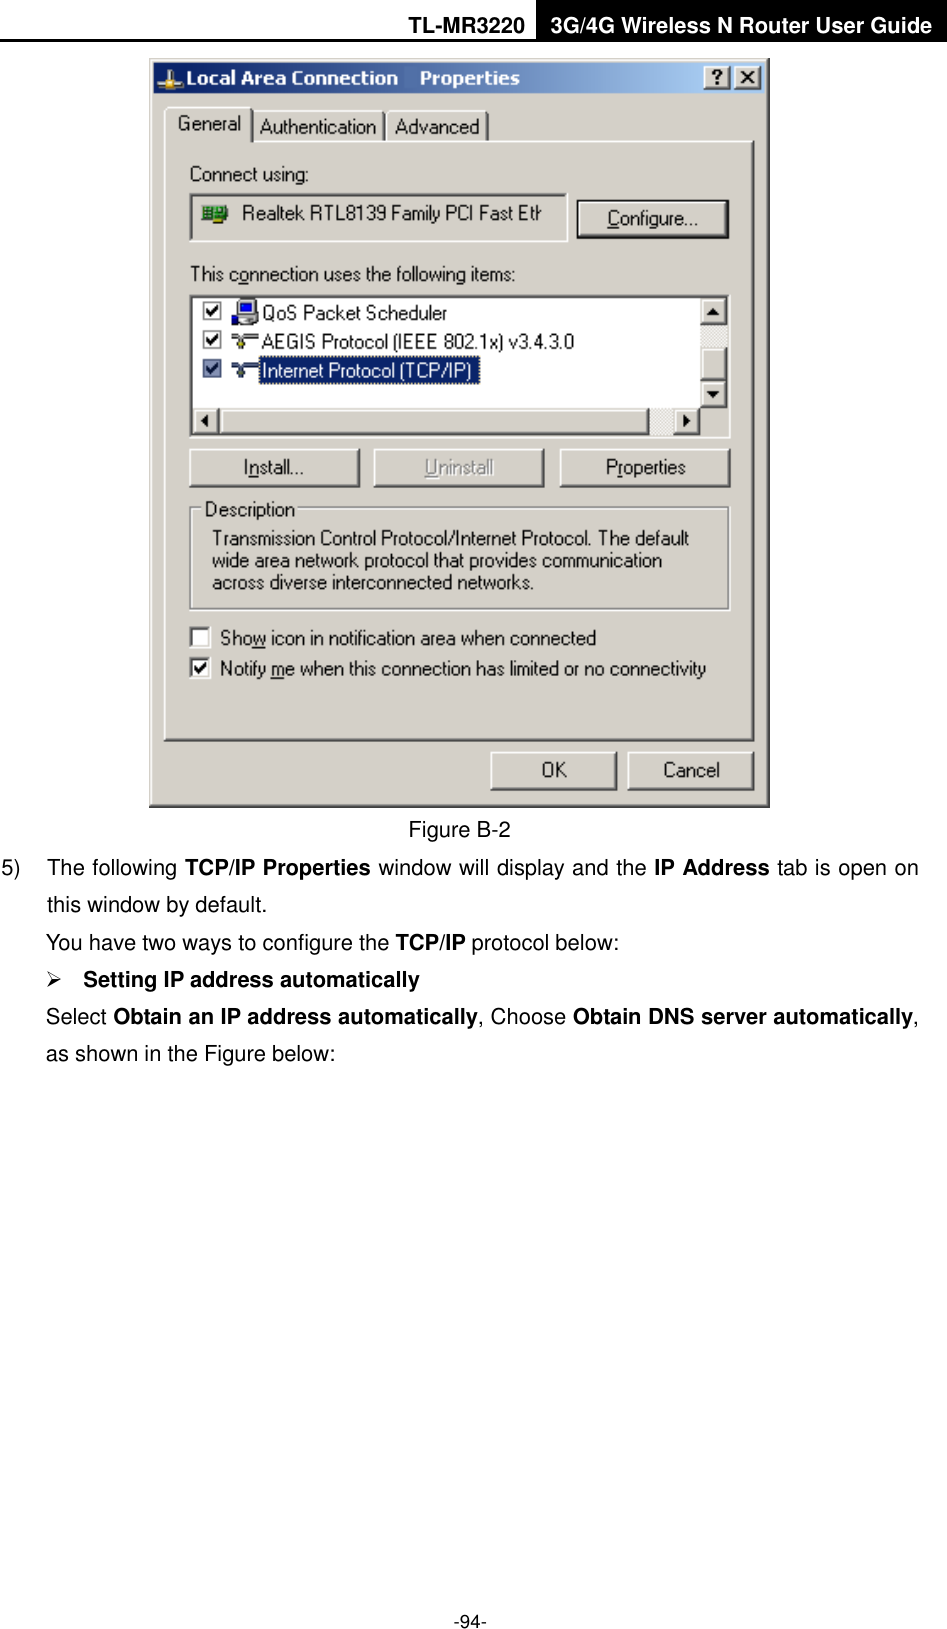 TL-MR3220 3G/4G Wireless N Router User Guide  -94-  Figure B-2 5)  The following TCP/IP Properties window will display and the IP Address tab is open on this window by default. You have two ways to configure the TCP/IP protocol below:  Setting IP address automatically Select Obtain an IP address automatically, Choose Obtain DNS server automatically, as shown in the Figure below: 